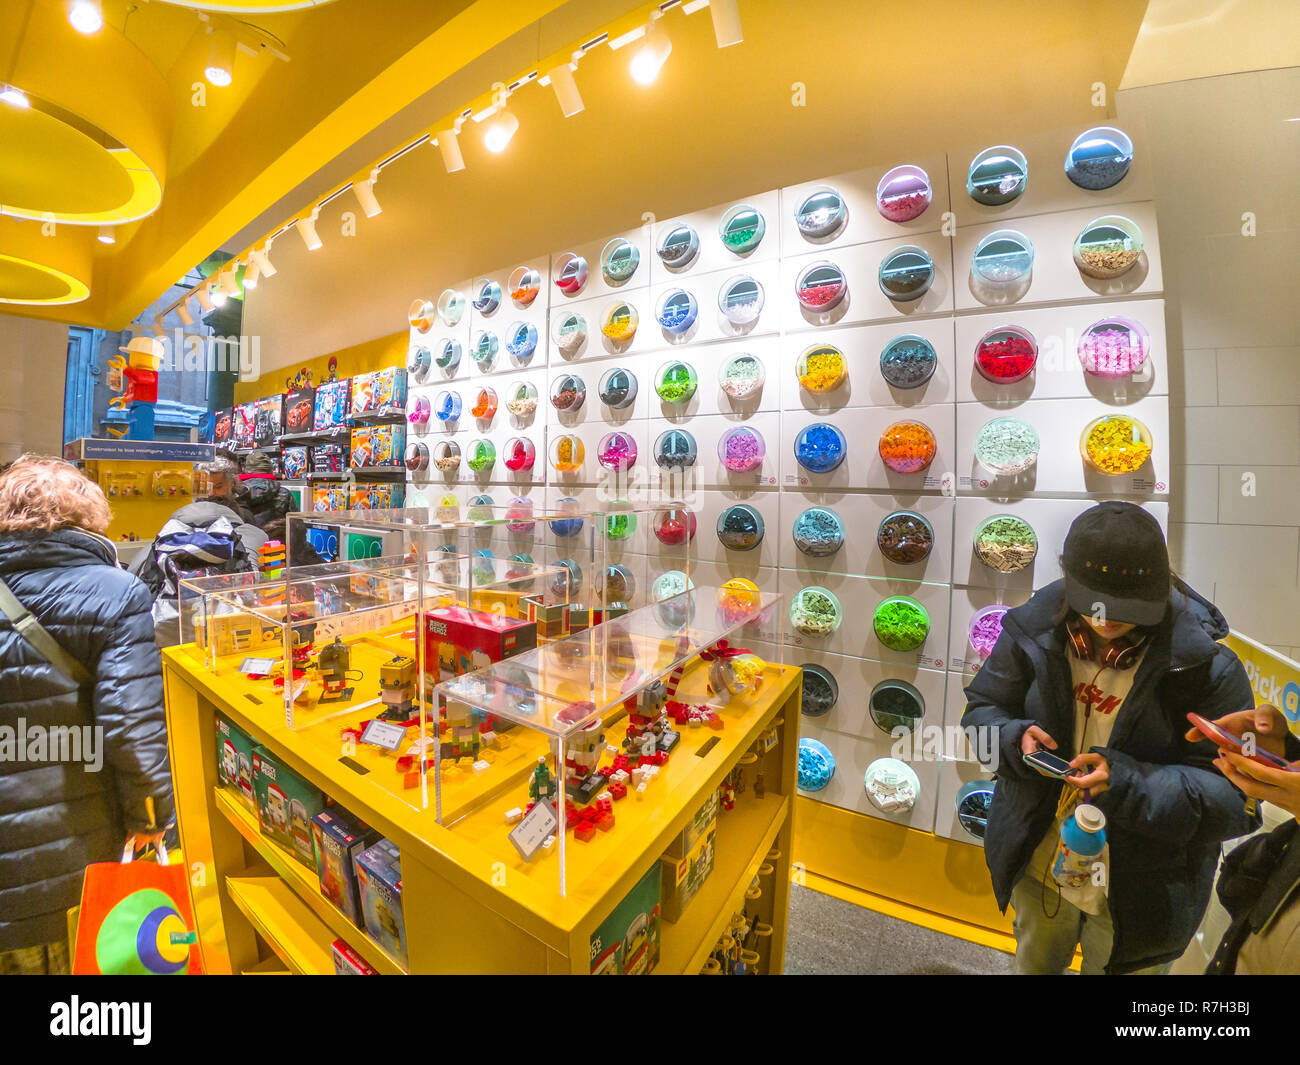 Lego Shop High Resolution Stock Photography and Images - Alamy